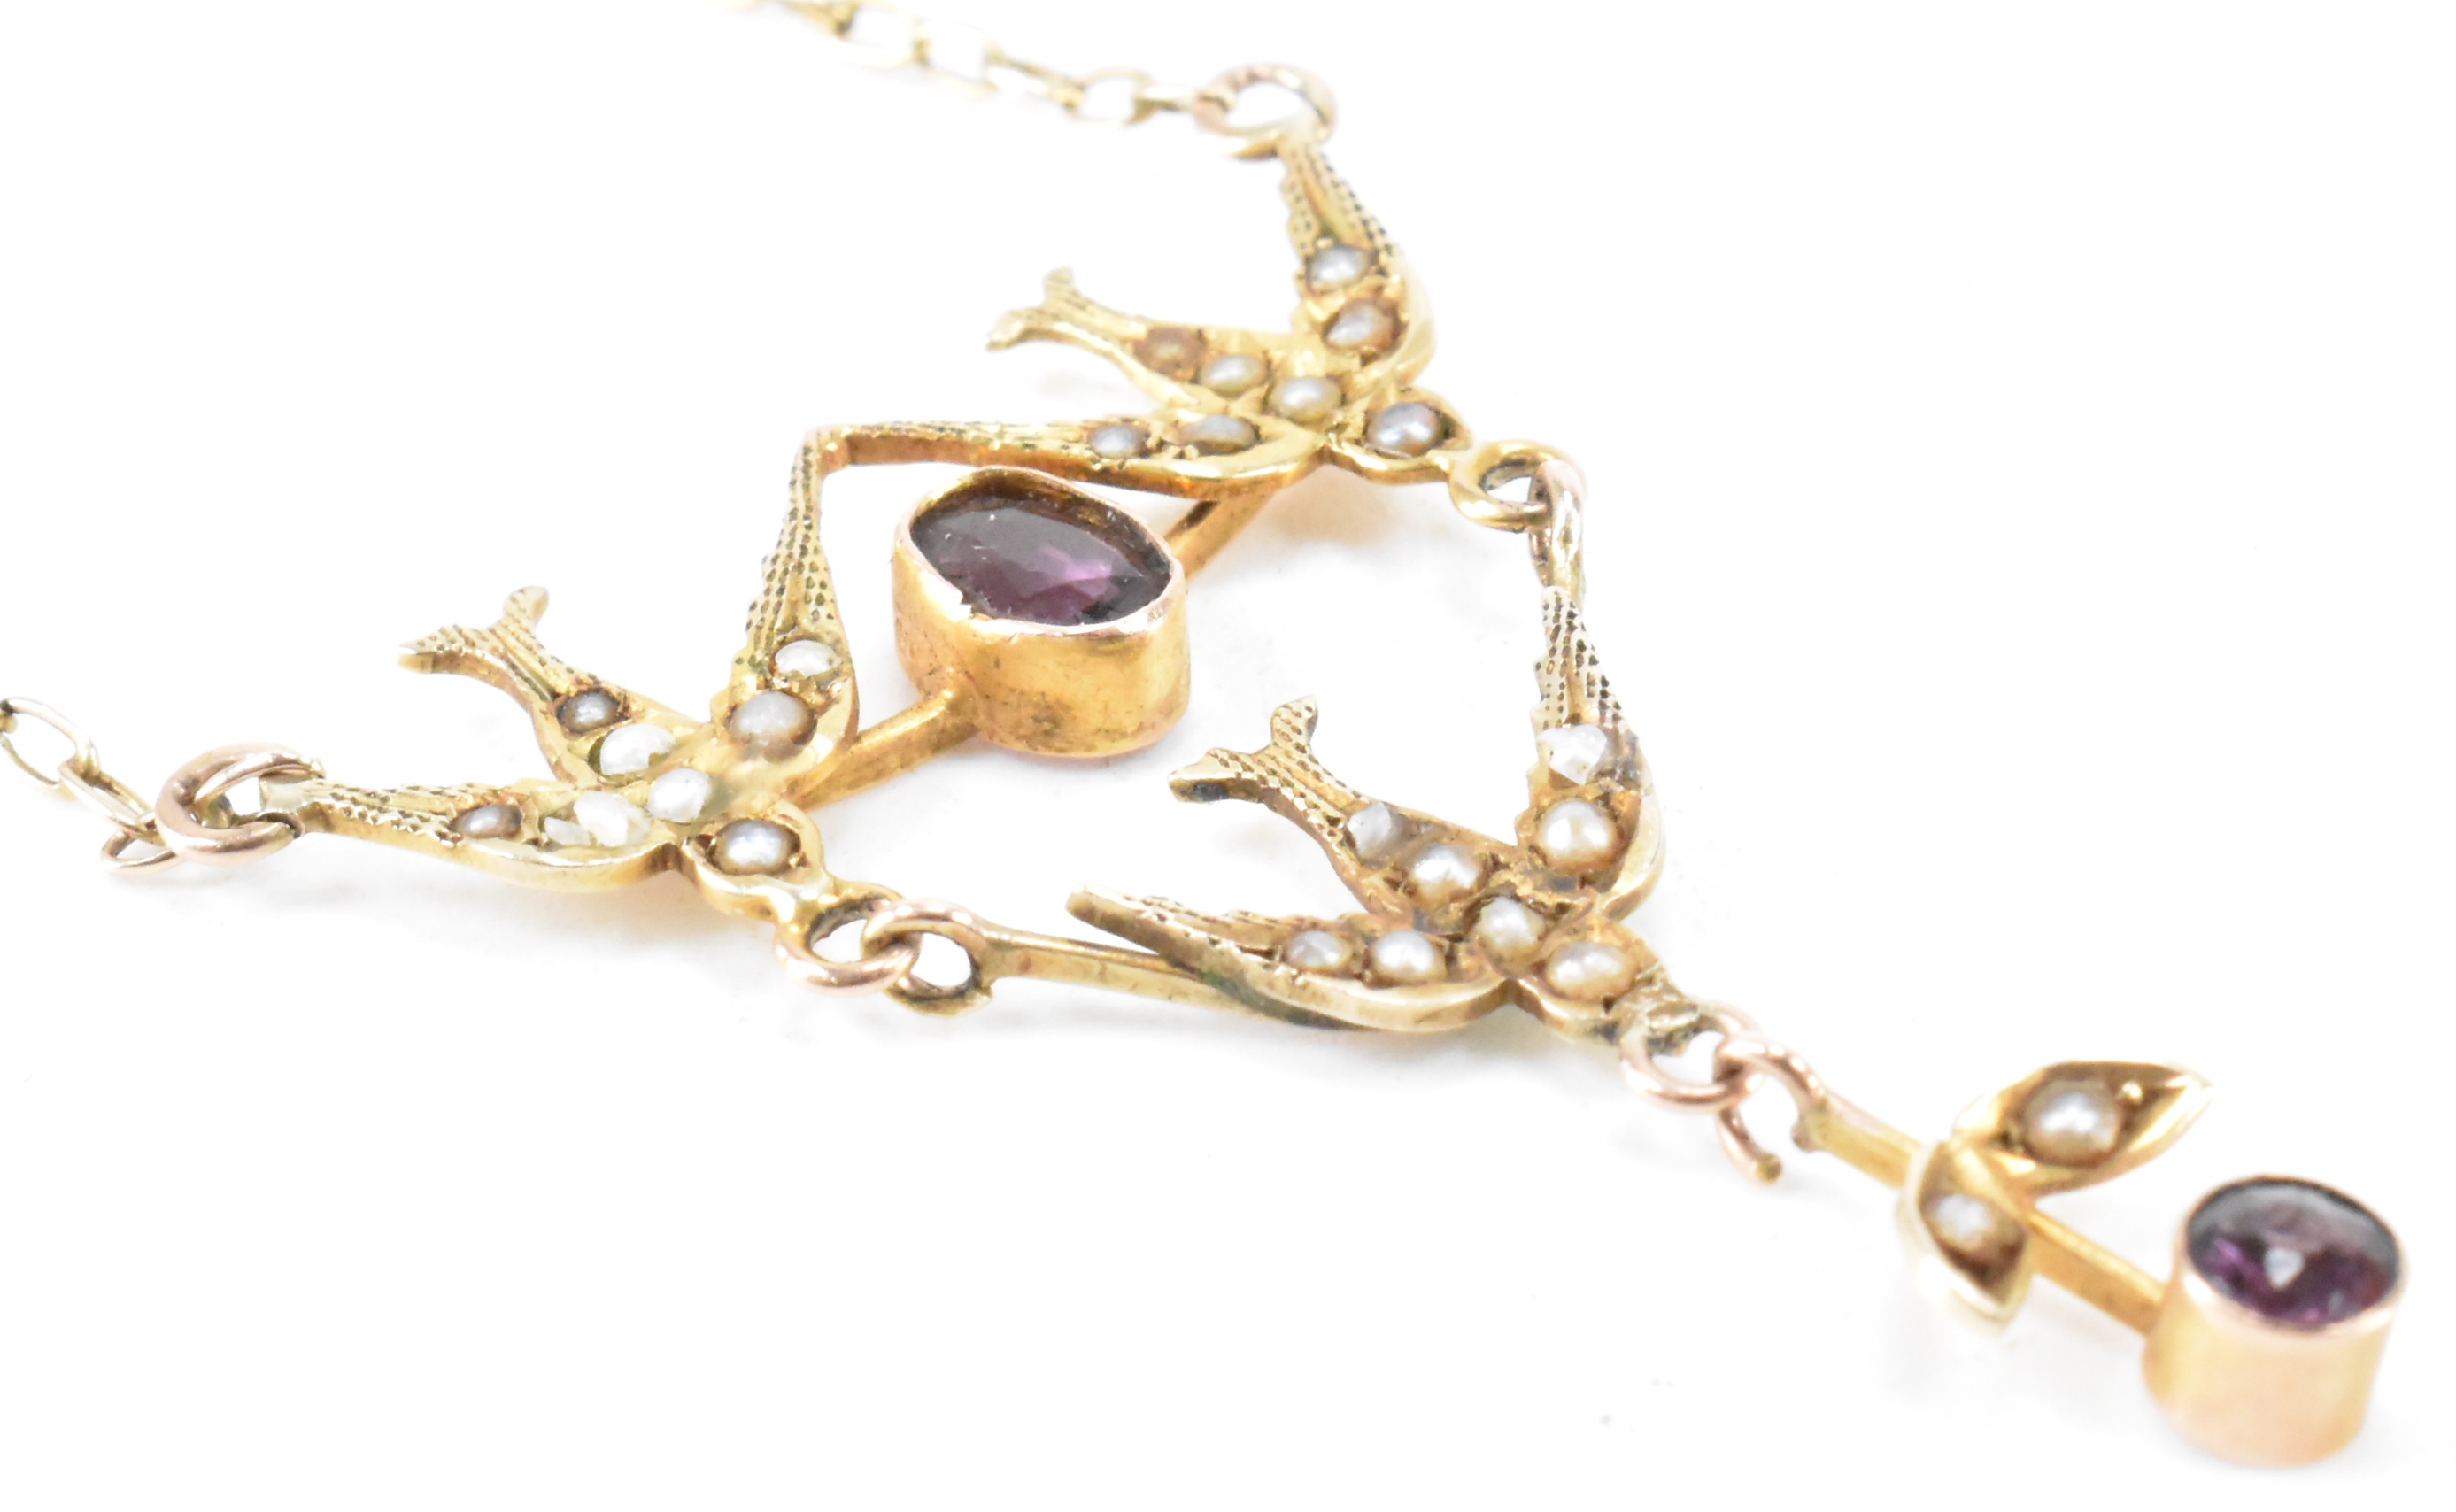 VICTORIAN GOLD SEEDPEARL & PASTE SWALLOW NECKLACE - Image 3 of 9